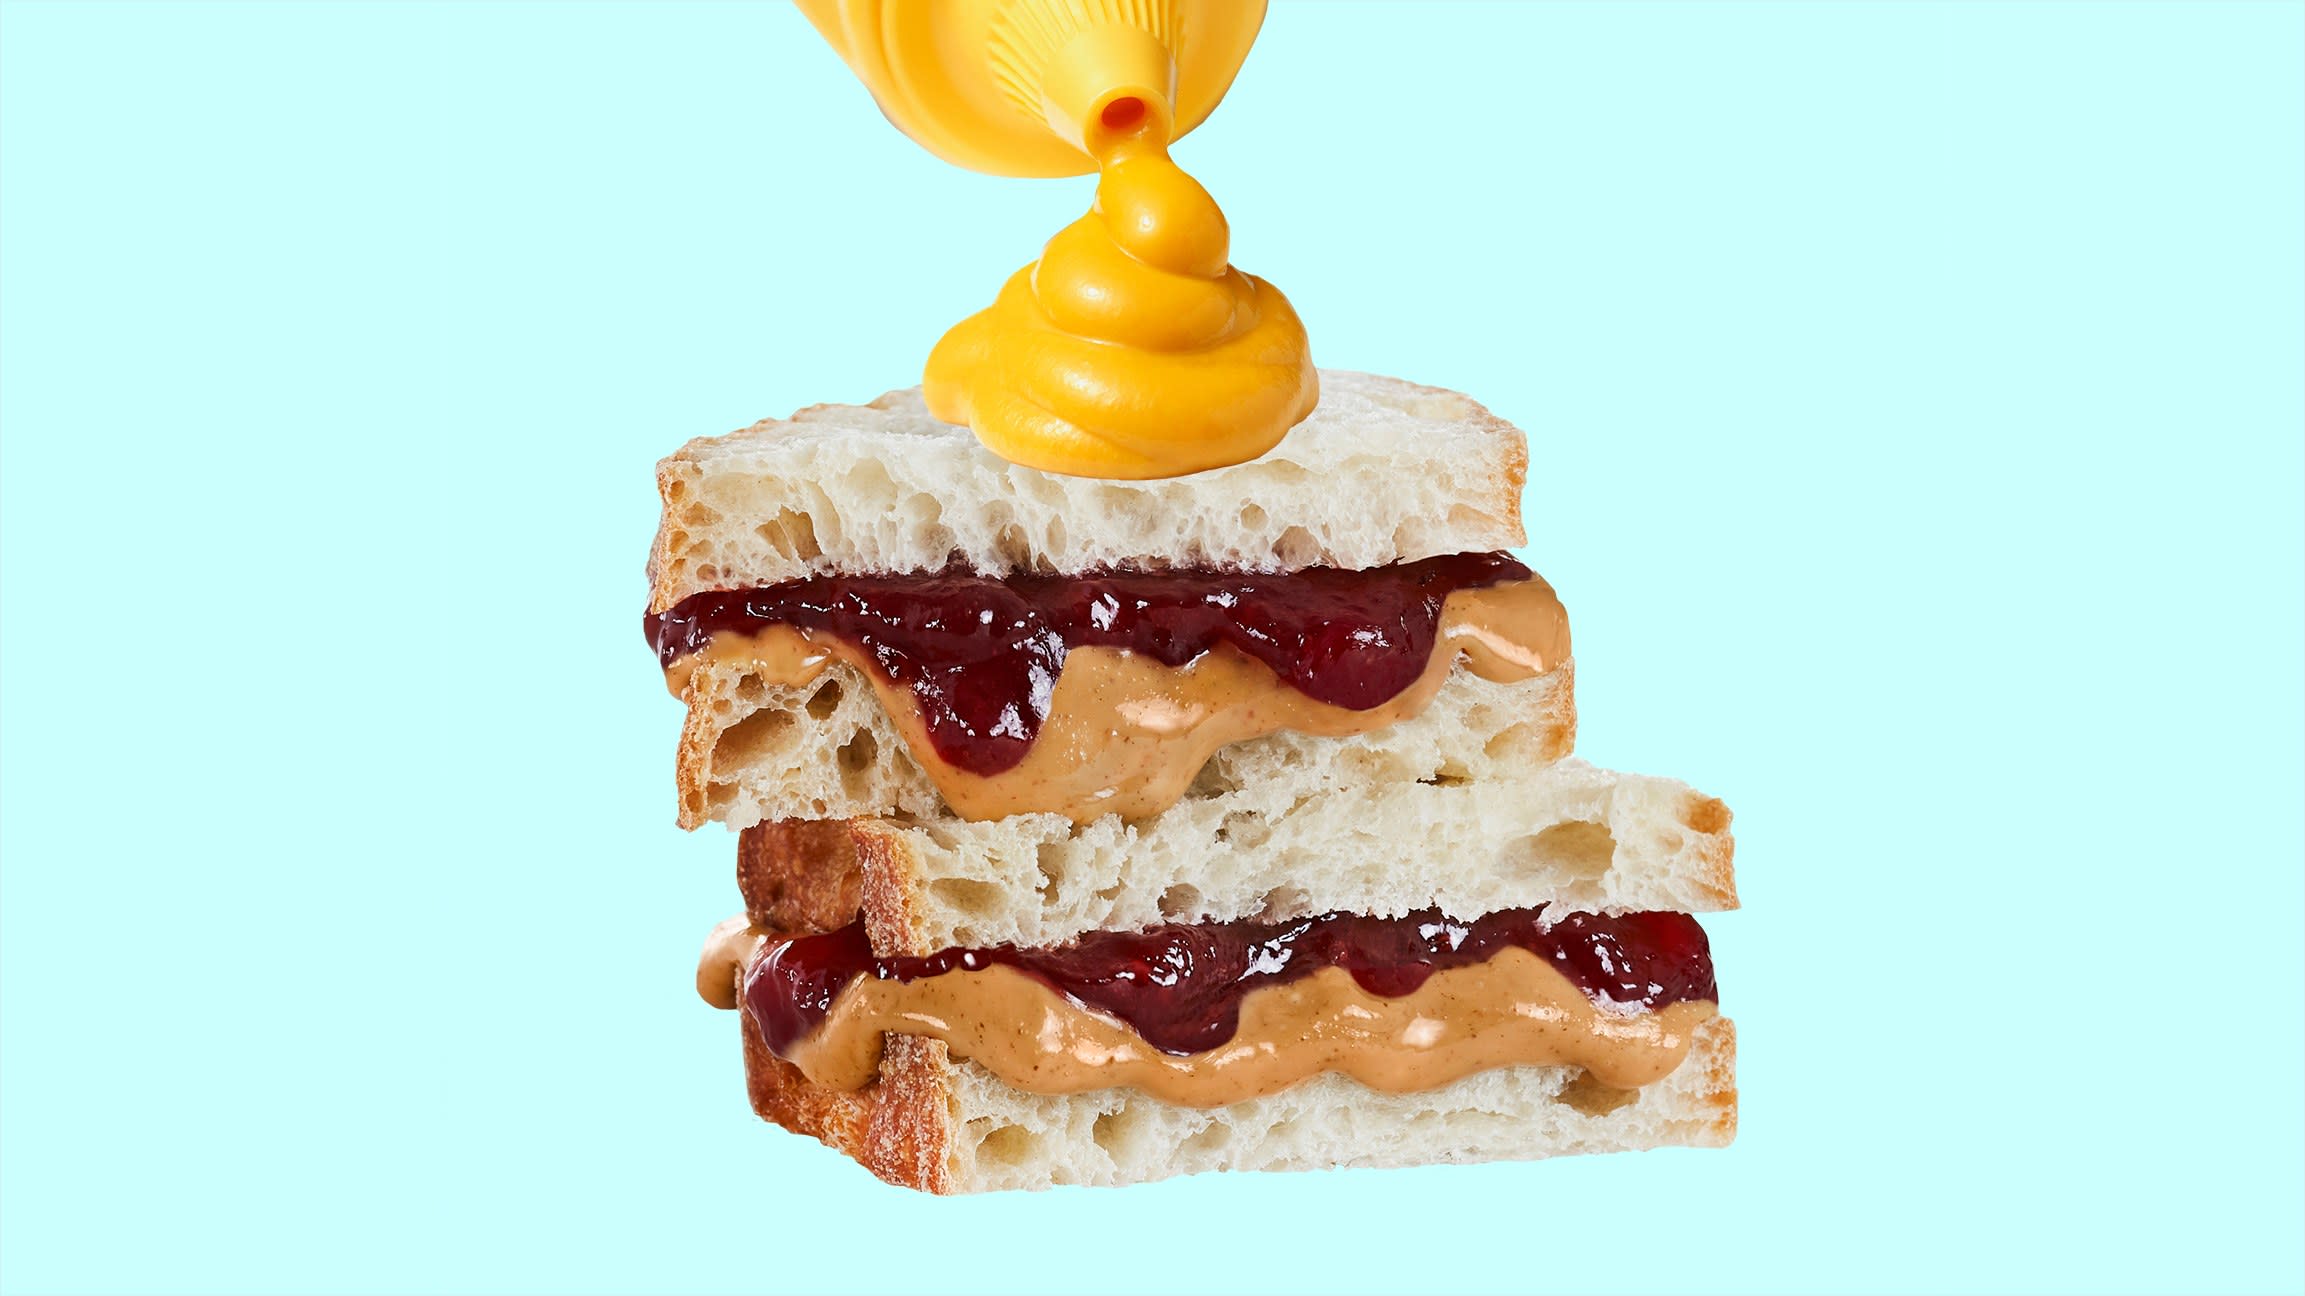 I Tried the Stupid PB&J Sandwich with Mustard on Top